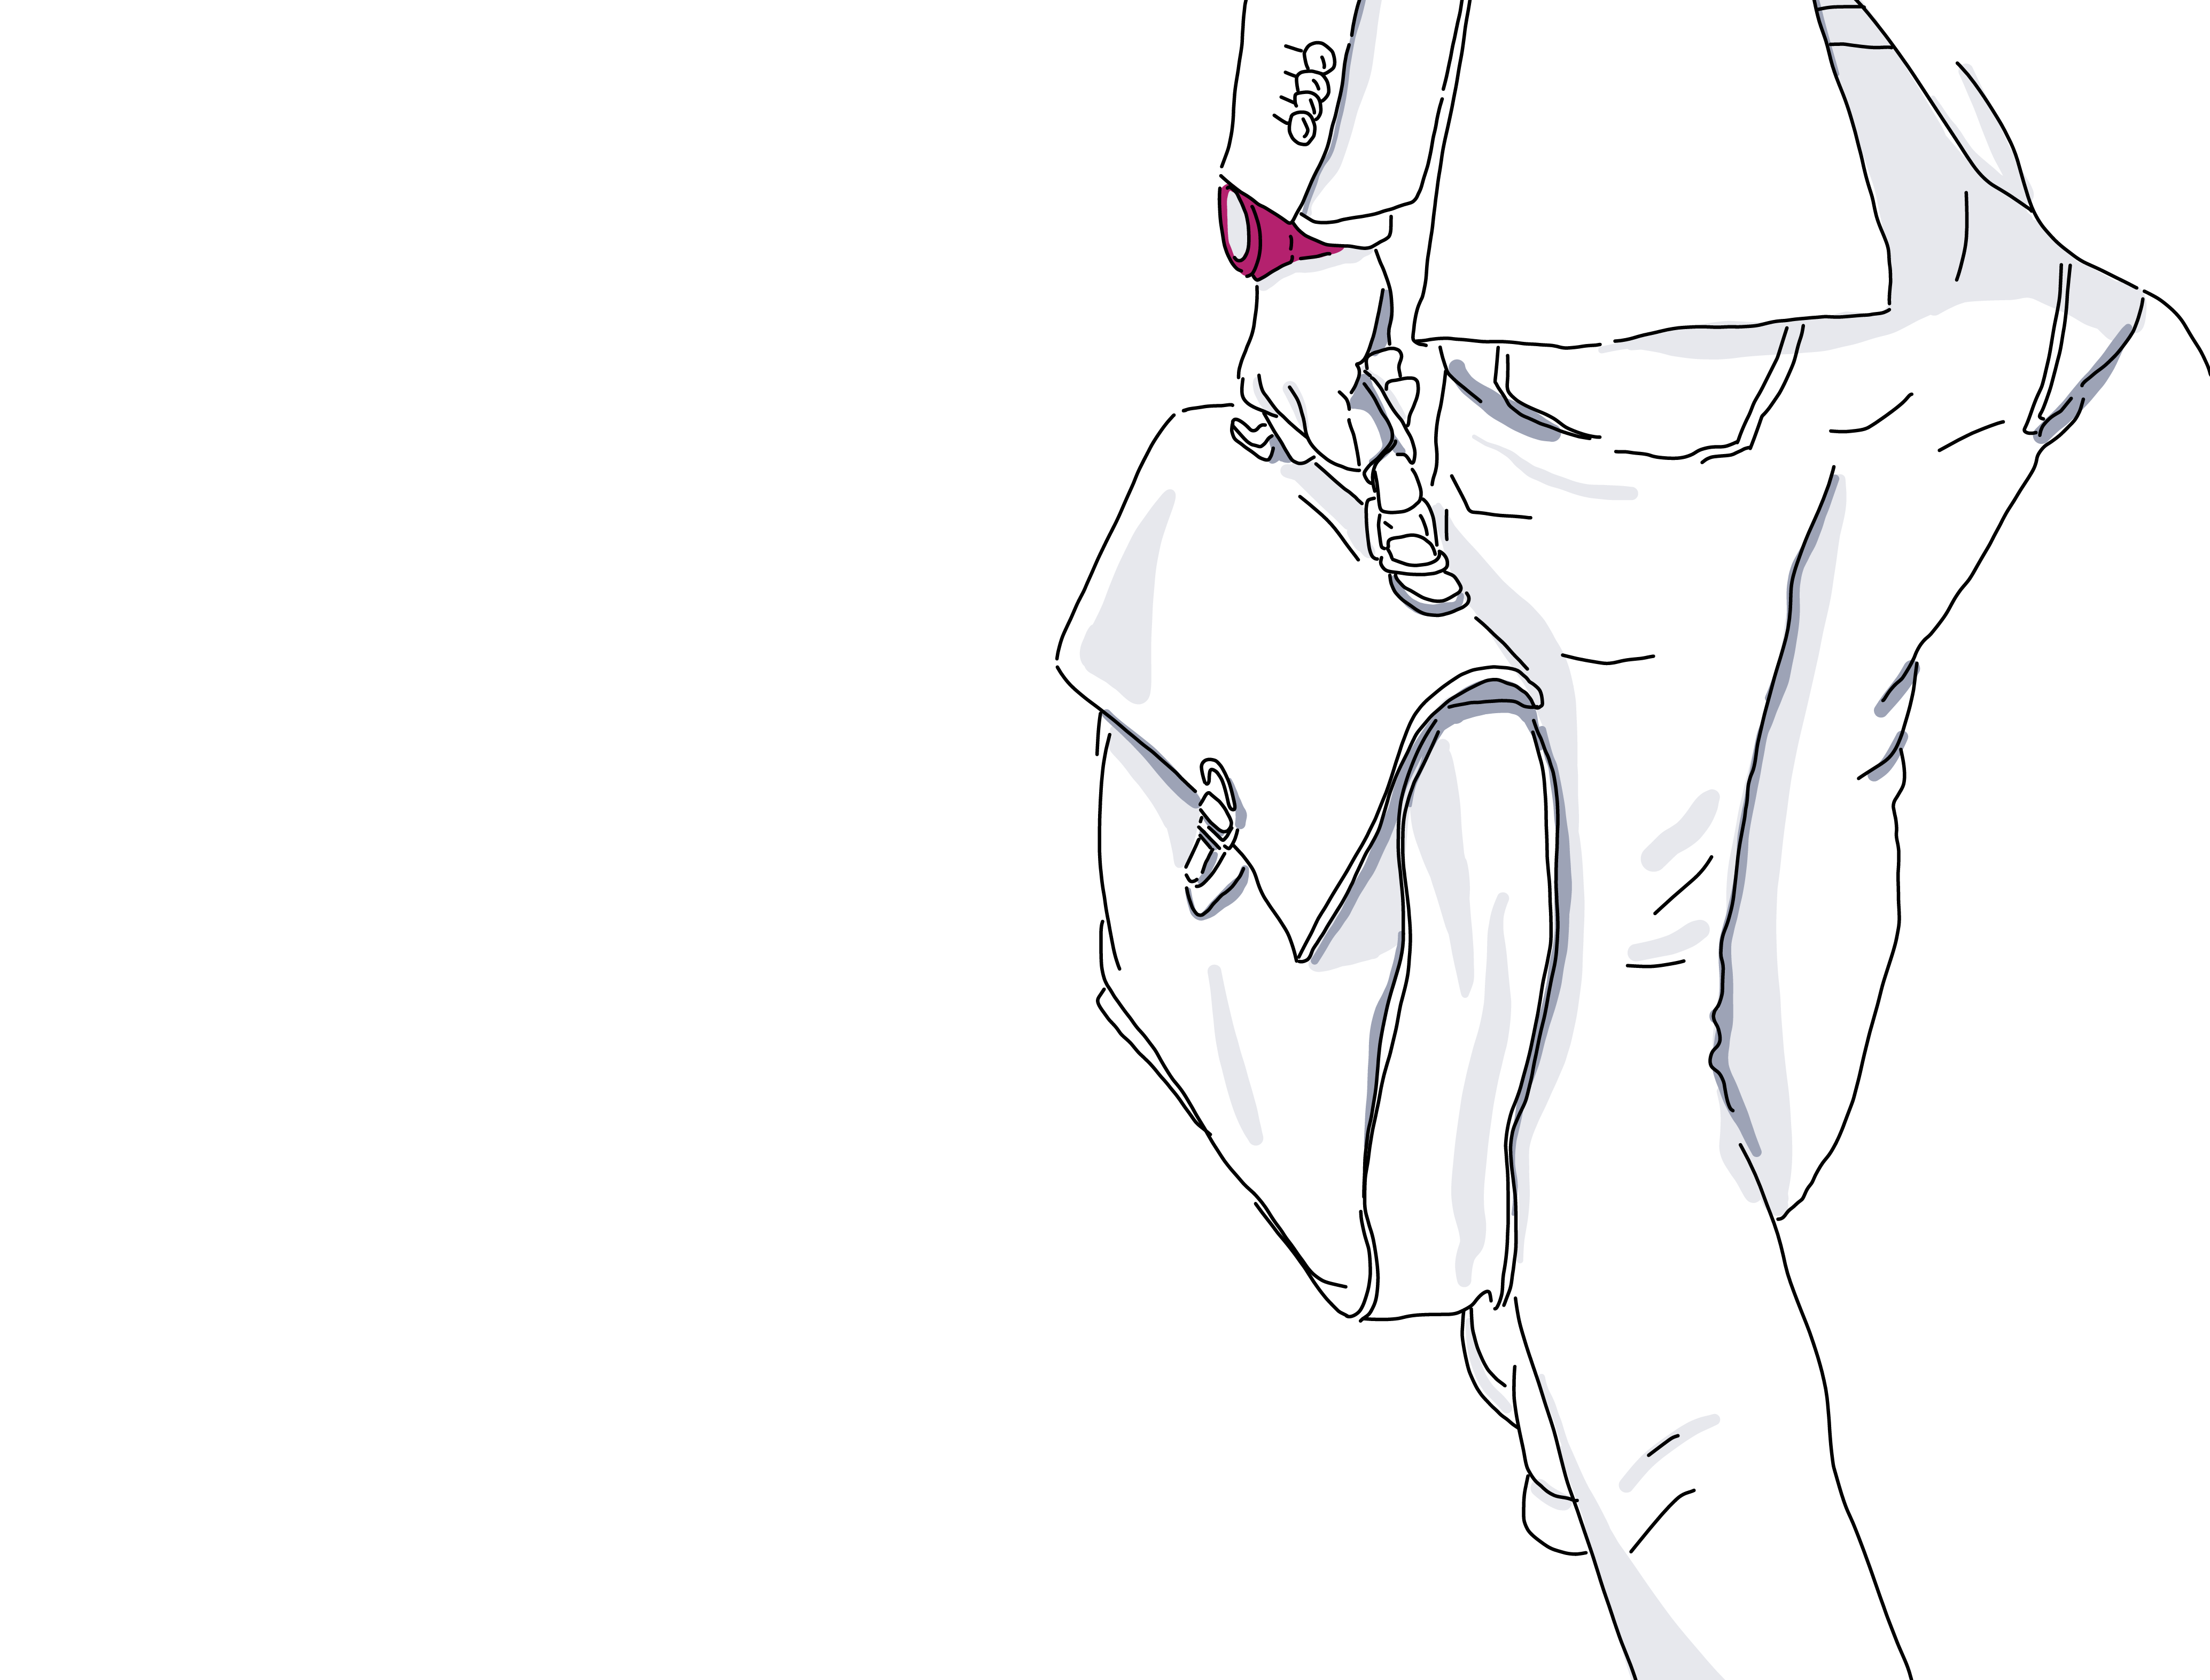 sketch of businessperson walking with briefcase